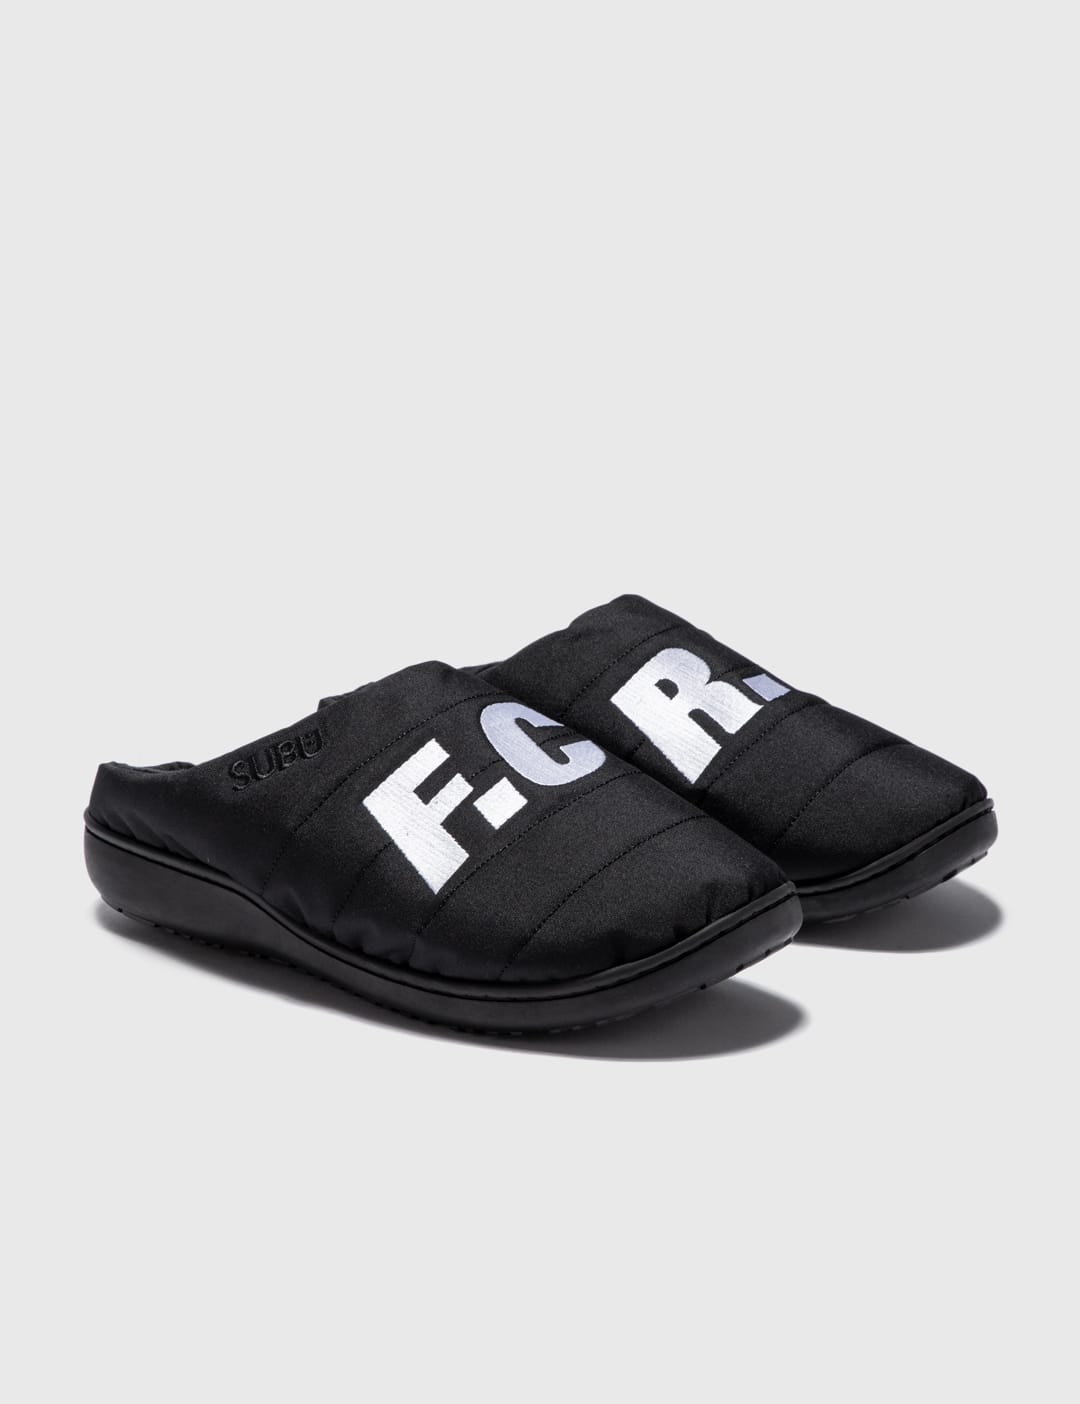 F.C. Real Bristol - Subu FCRB Sandals | HBX - Globally Curated ...